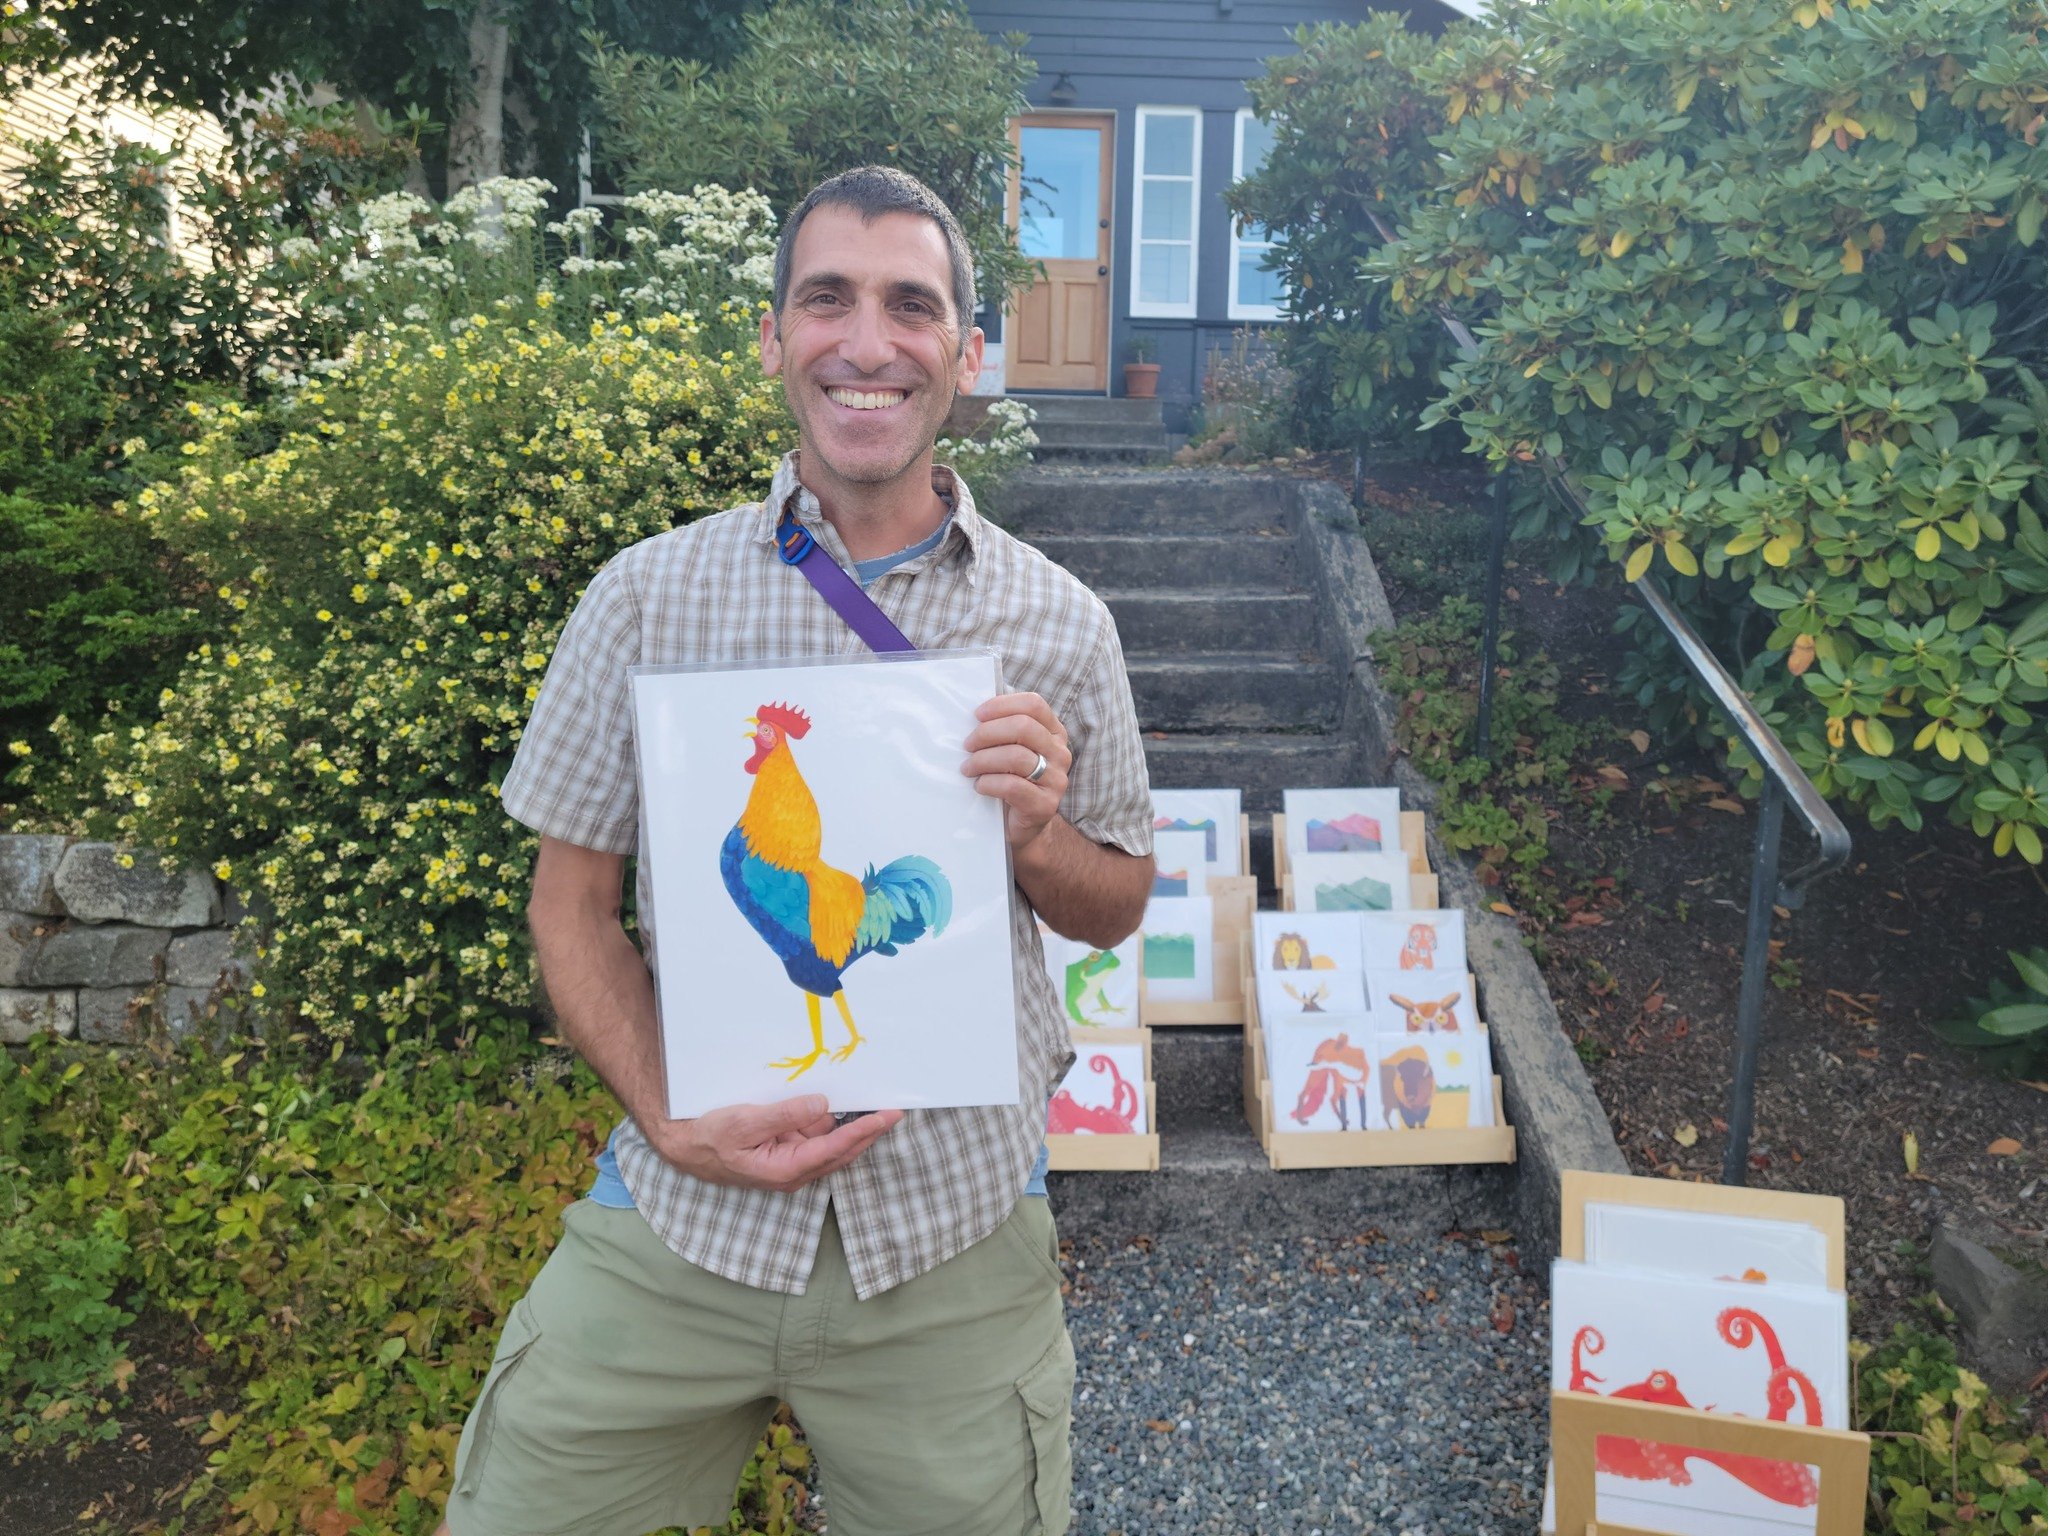 @fillerfogg knew the way to our hearts 🐓💖 as he displayed his artwork at the 2023 Stomp! 🎨 Share your talents and passions with the neighborhood and sign up to host a Stomp Stop on July 20, 2024. Register at 🔗: sunnylandstomp.com/hostsignup to ge